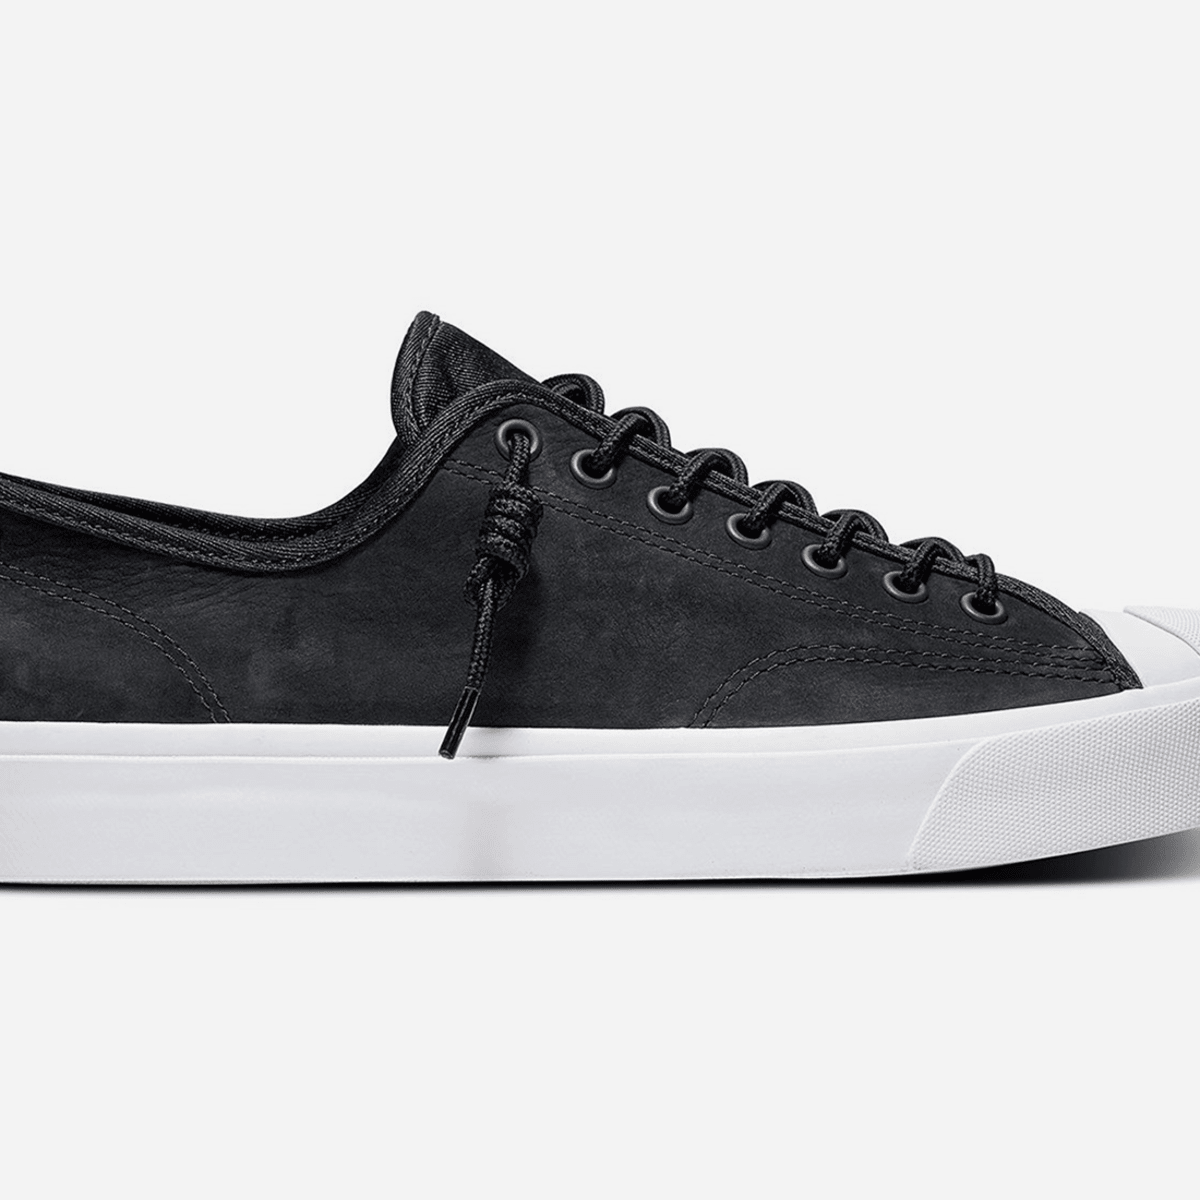 converse jack purcell nubuck sneakers